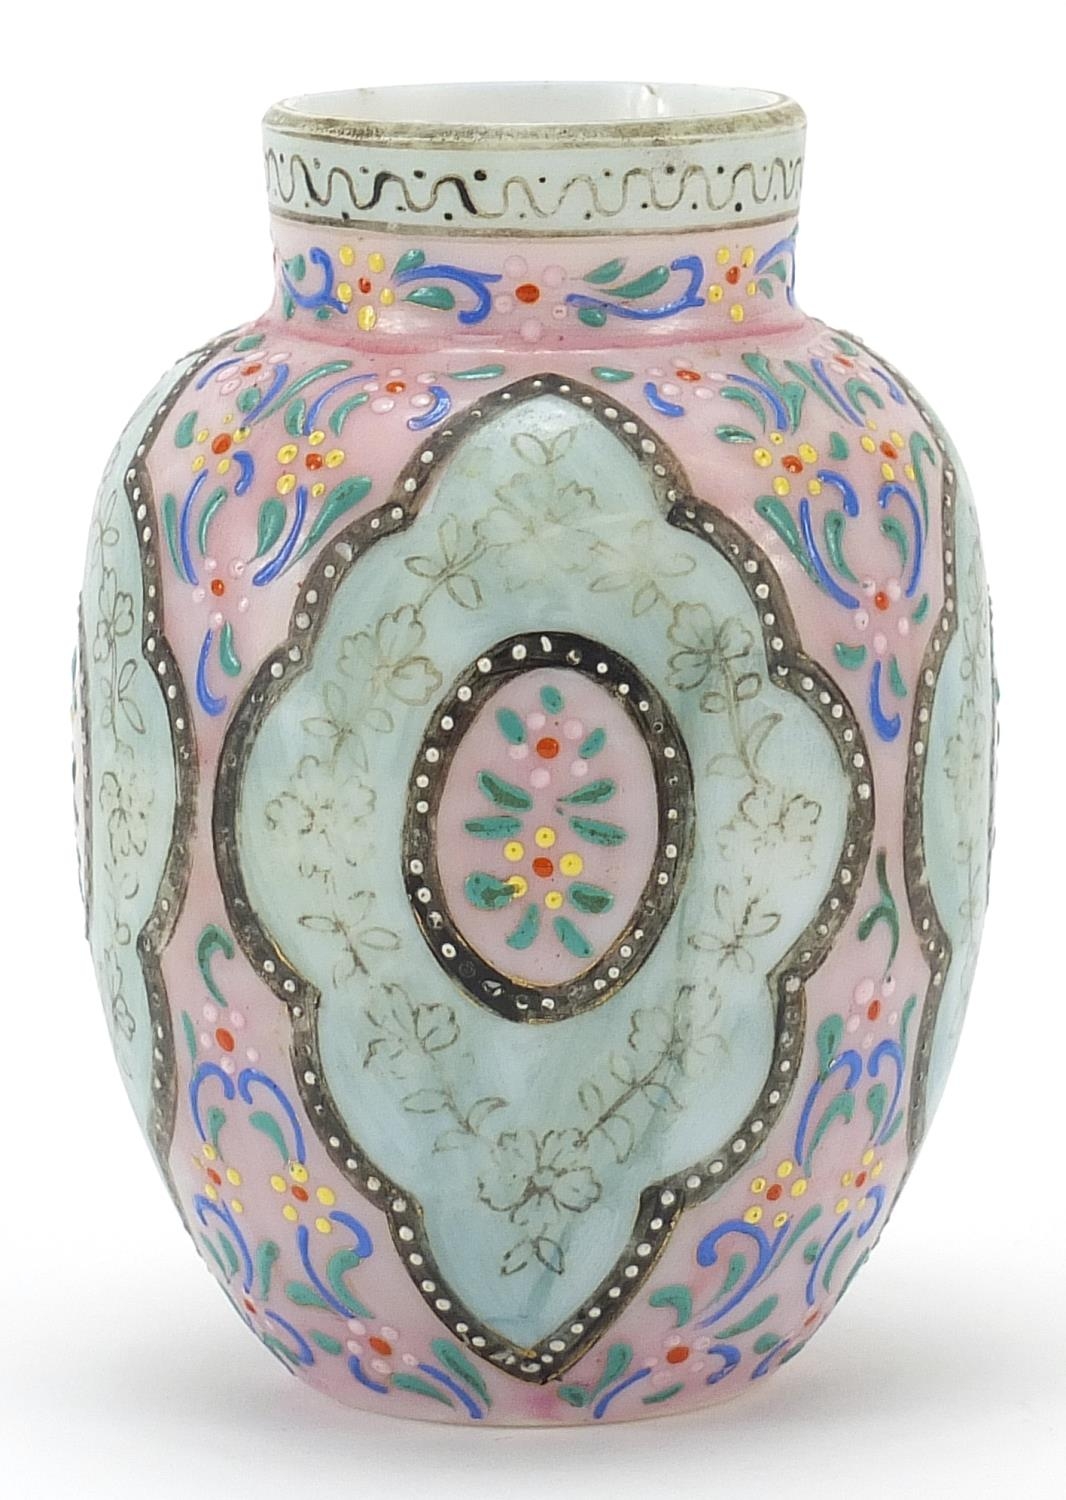 19th century opaque glass vase hand painted in the Islamic manner with flowers, 12.5cm high